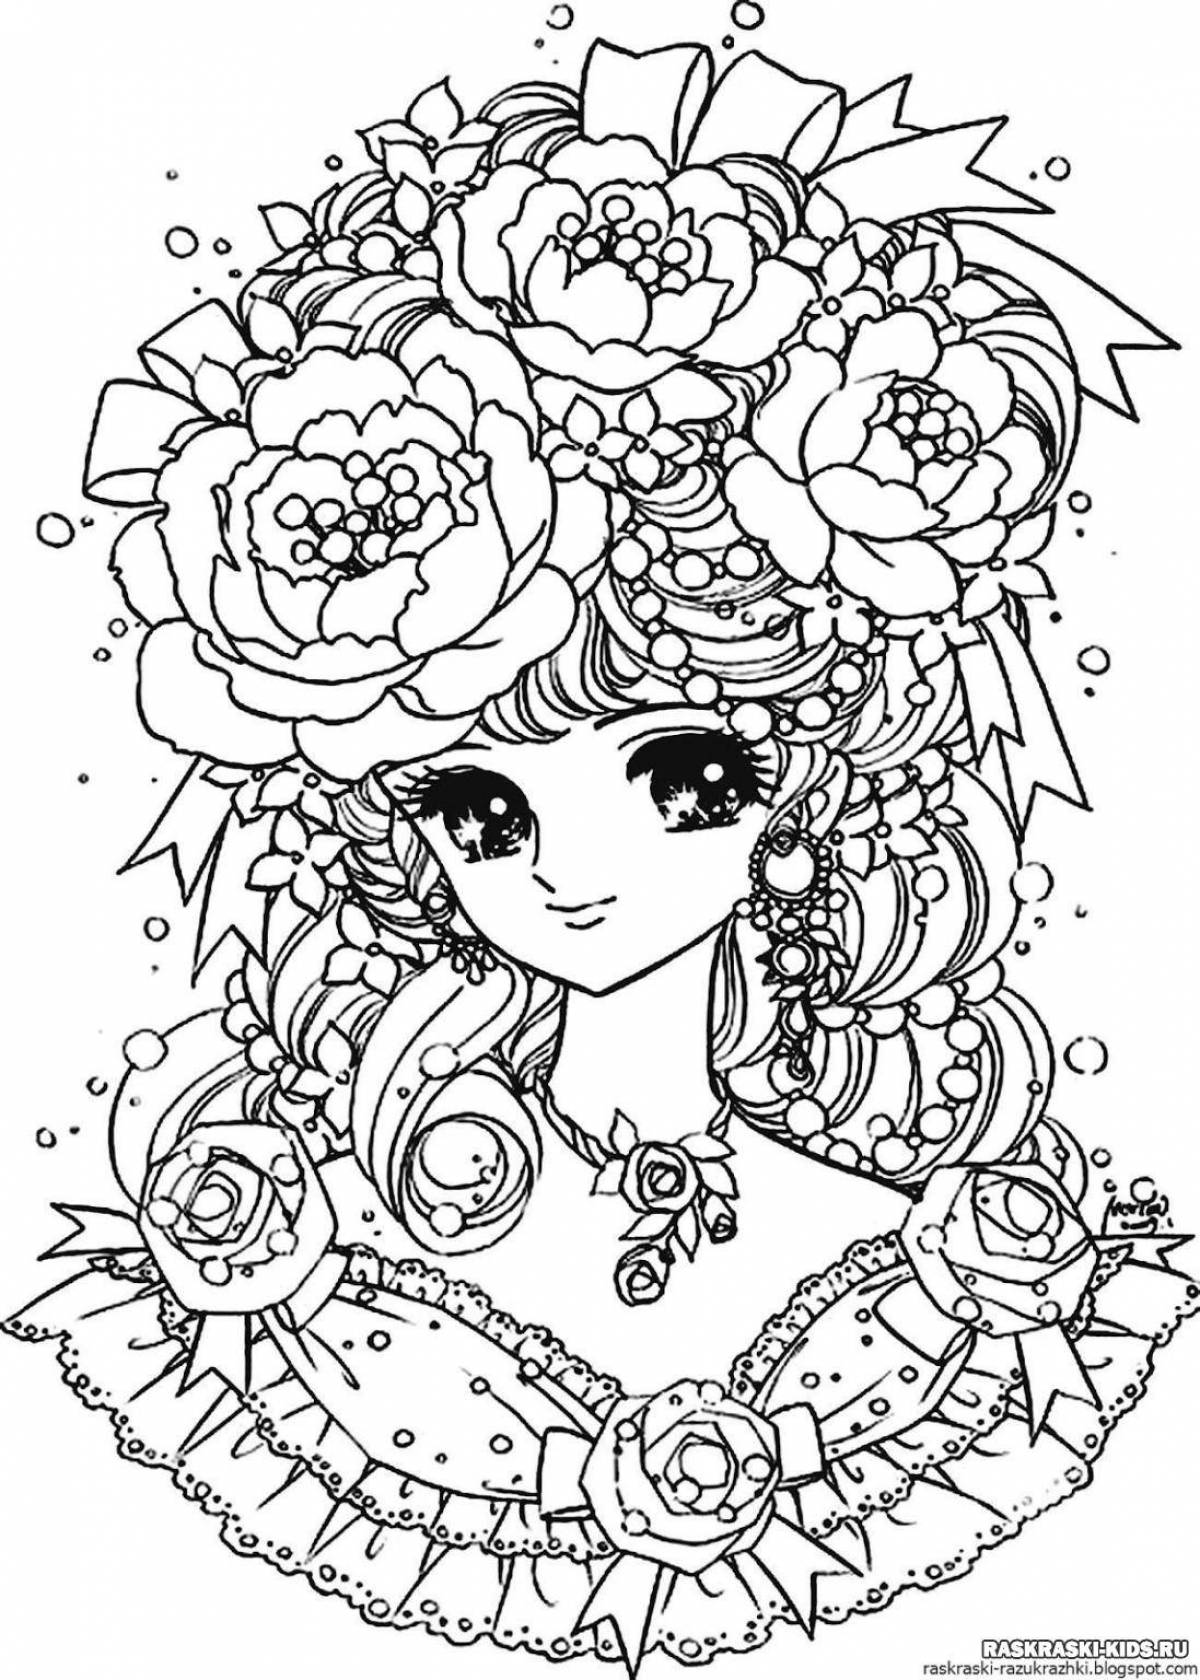 Exalted anti-stress coloring book for girls 9-10 years old